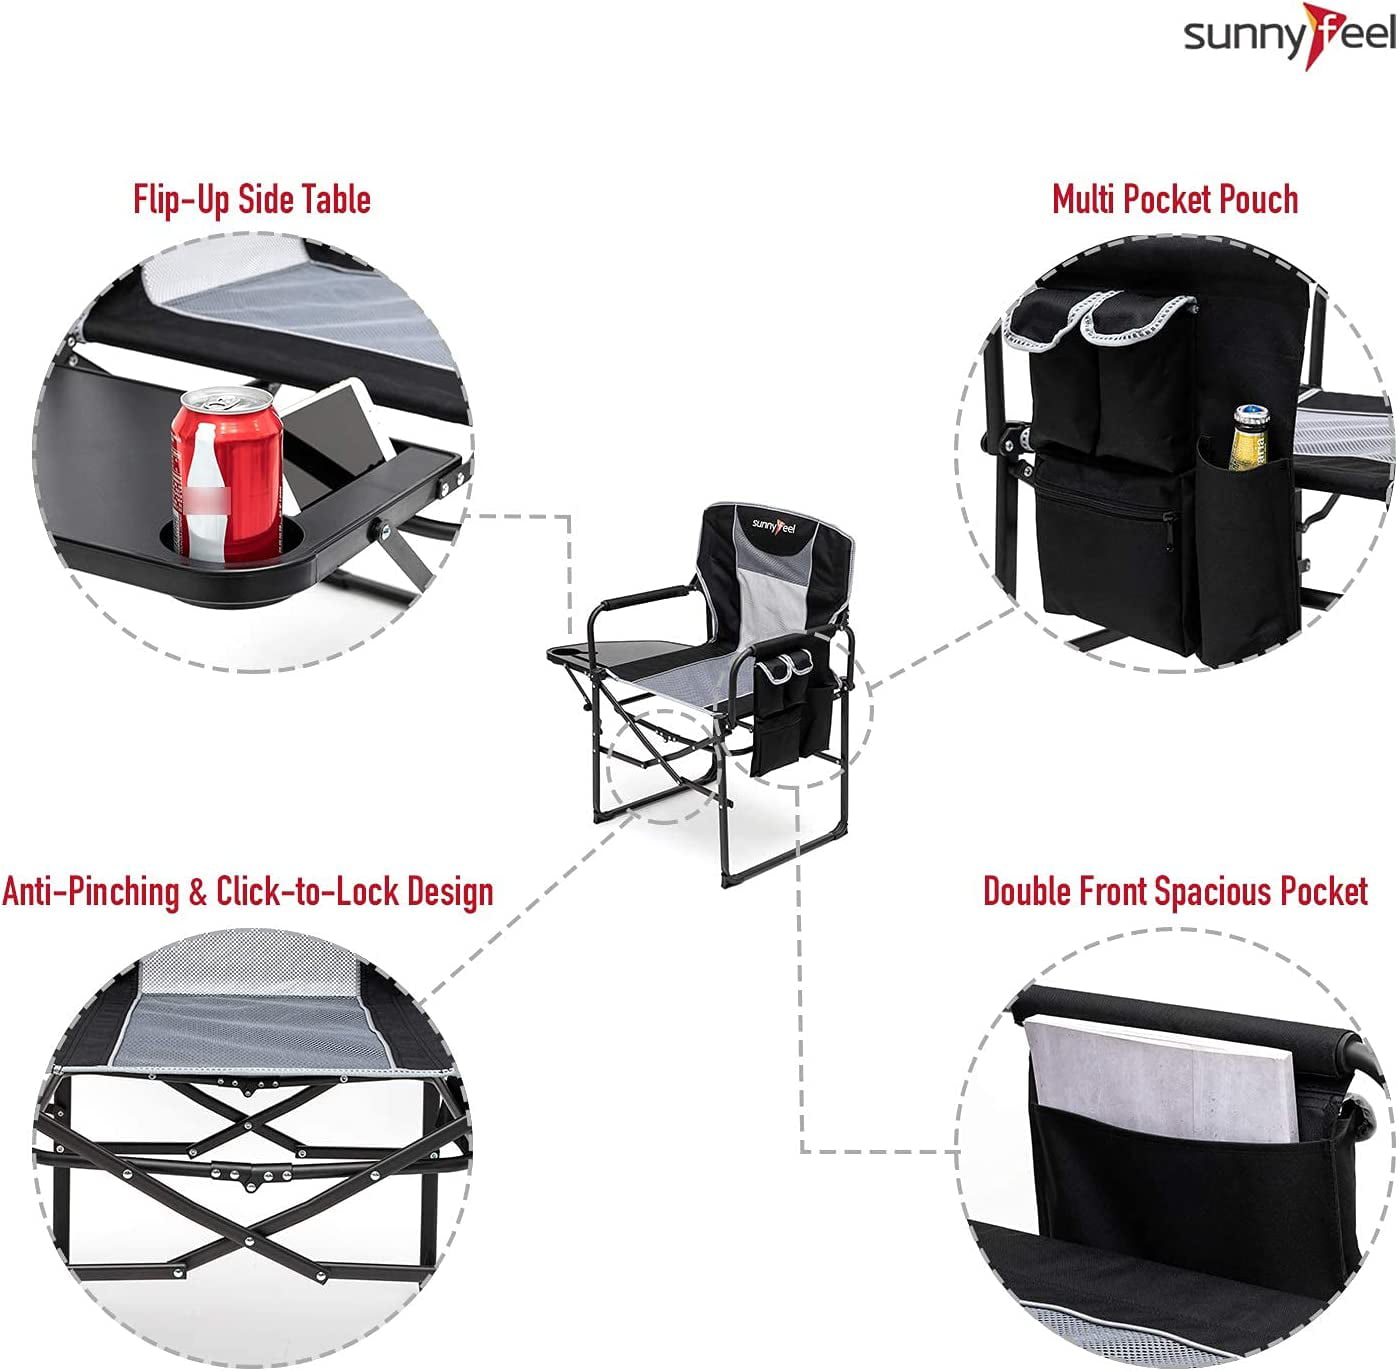 Sunnyfeel 2-Set Camping Directors Chair, Oversized Portable Folding Chair with Side Table, Pocket for Beach, Fishing,Trip,Picnic,Lawn,Concert Outdoor Foldable Camp Chairs